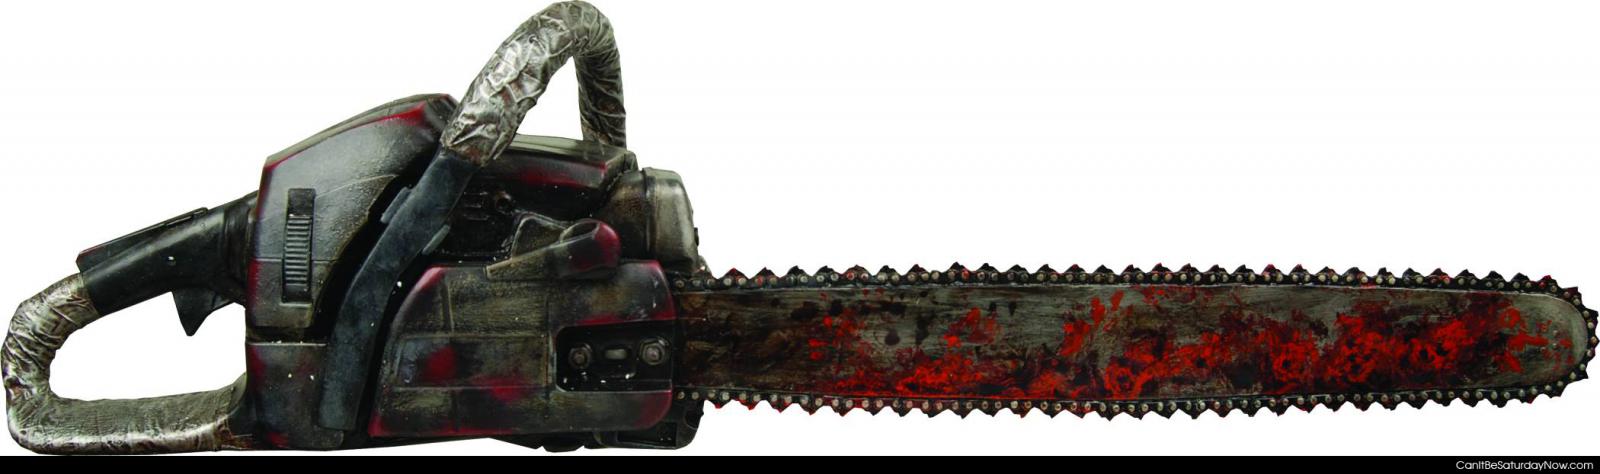 Bloody chainsaw - bloody chainsaw looks good with duct tape